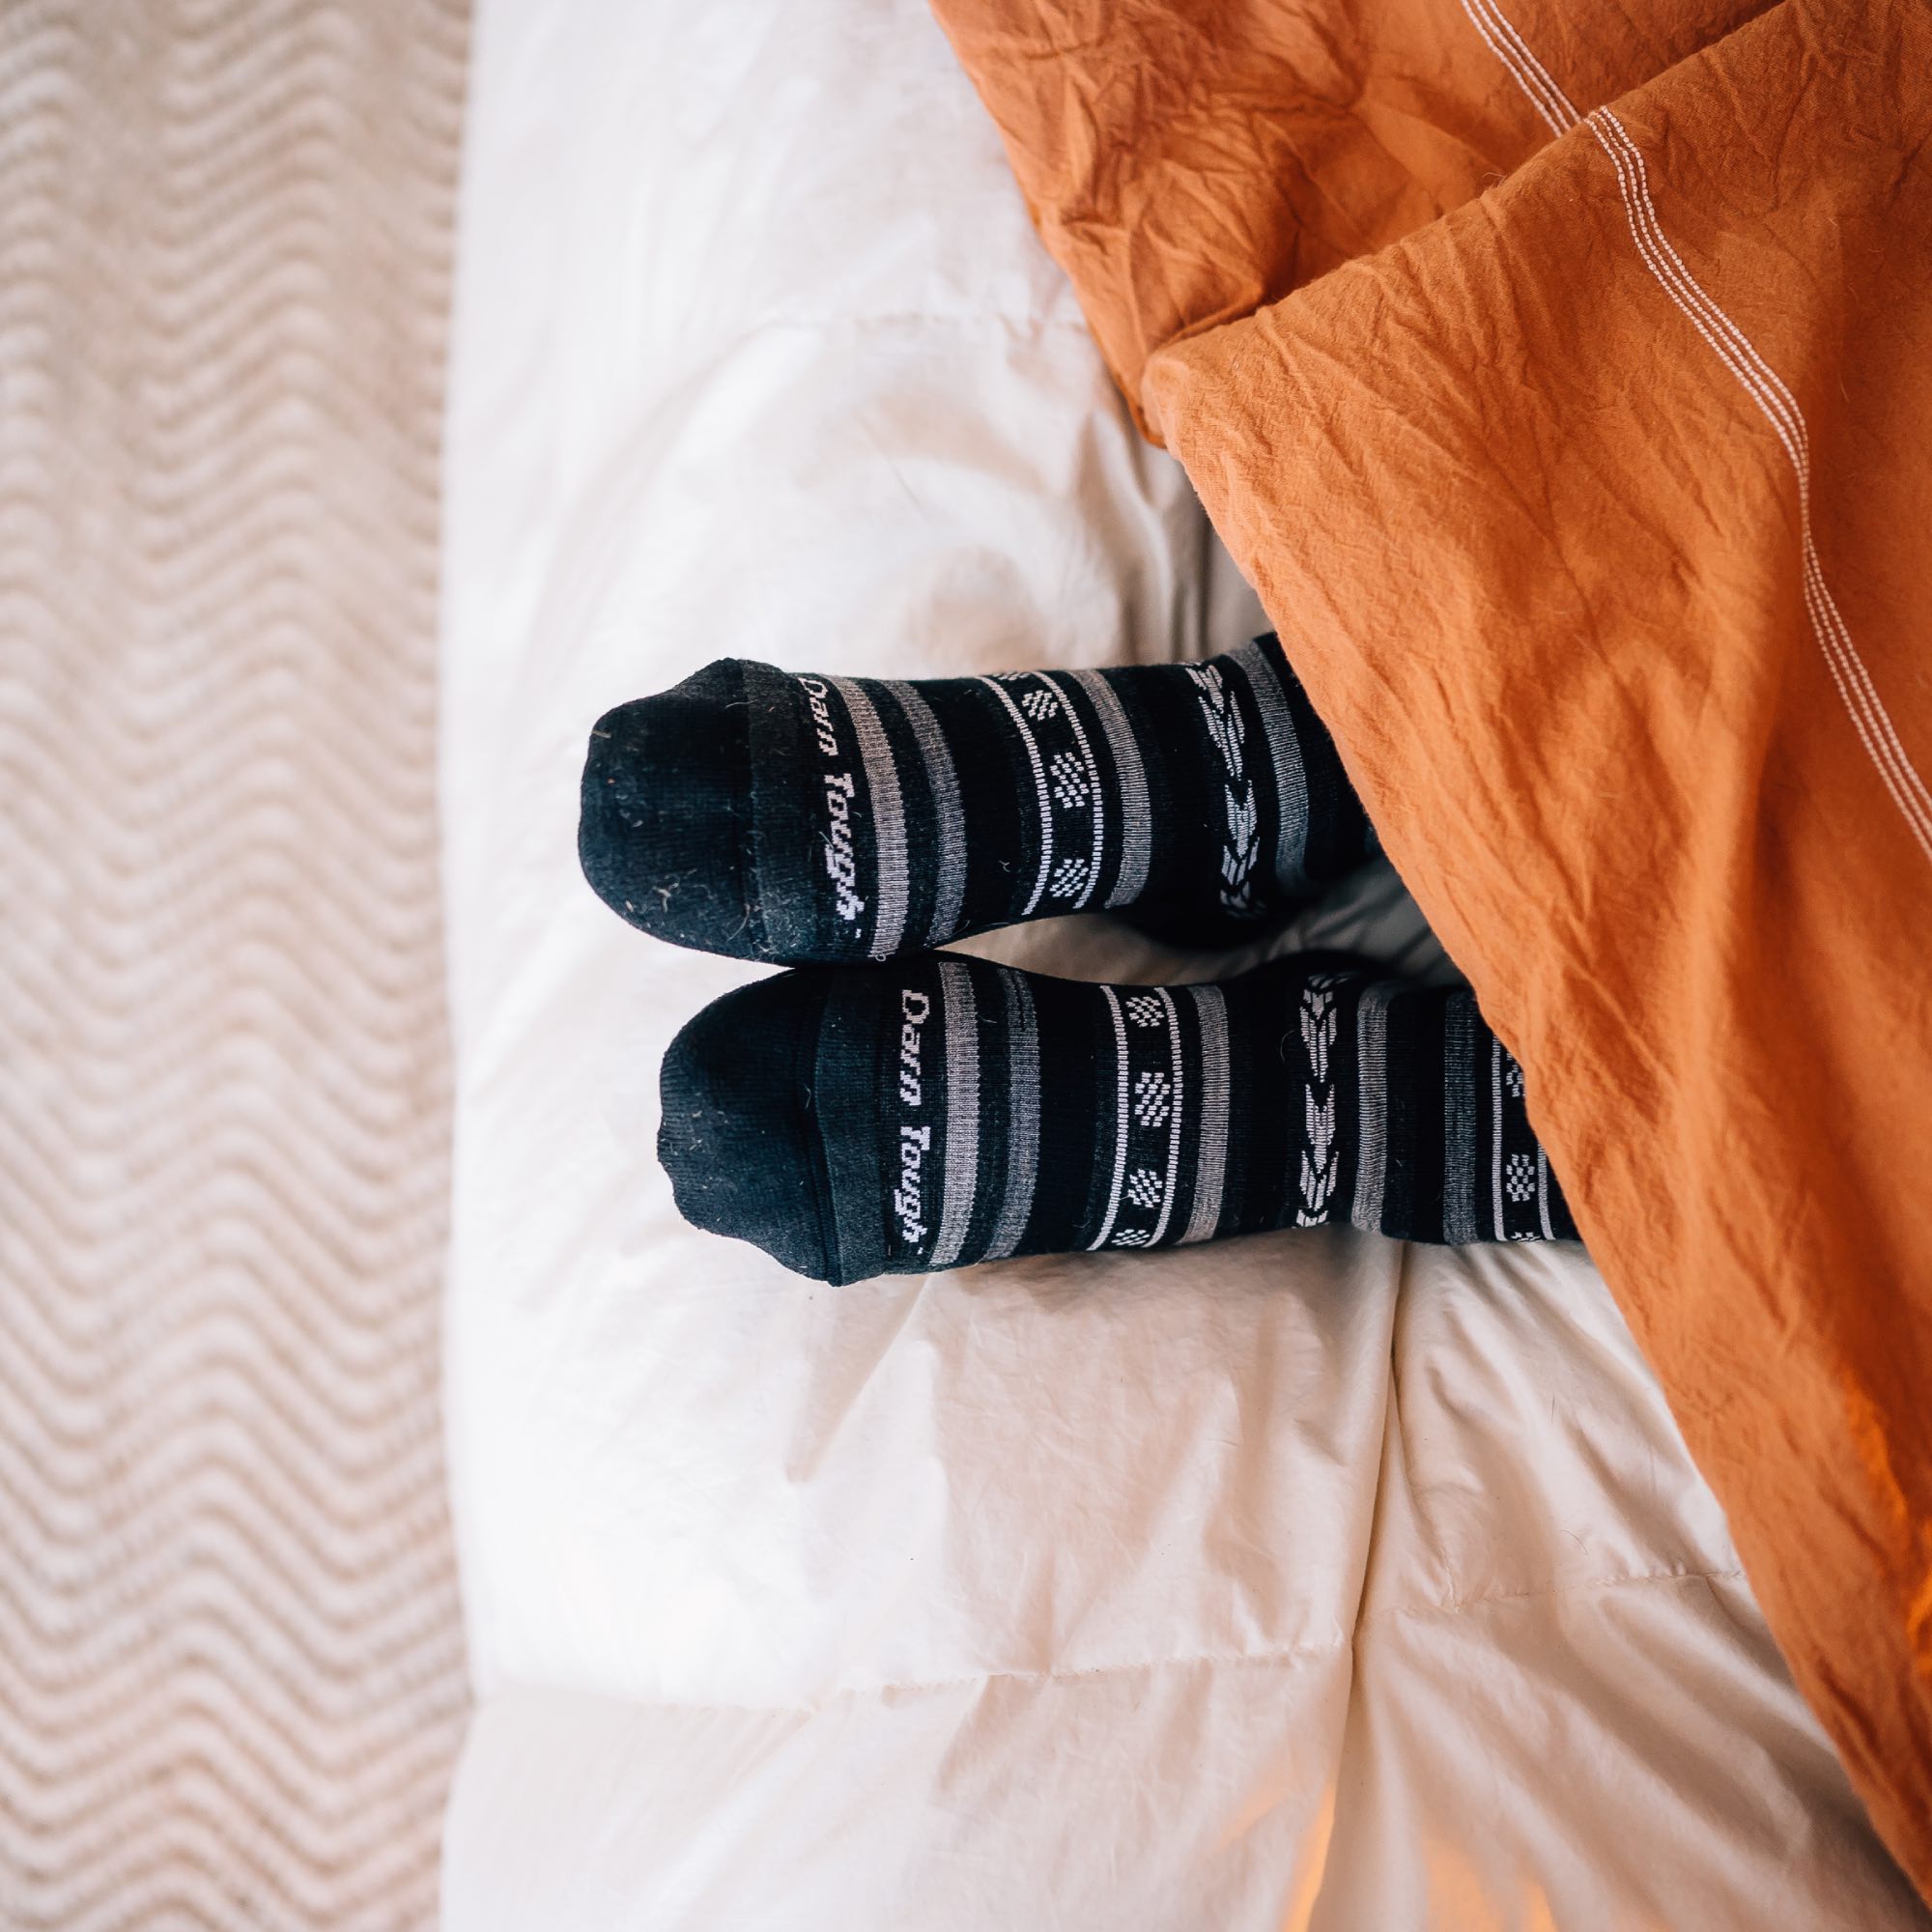 Sleeping with socks on: pros and cons - Nordic Socks US